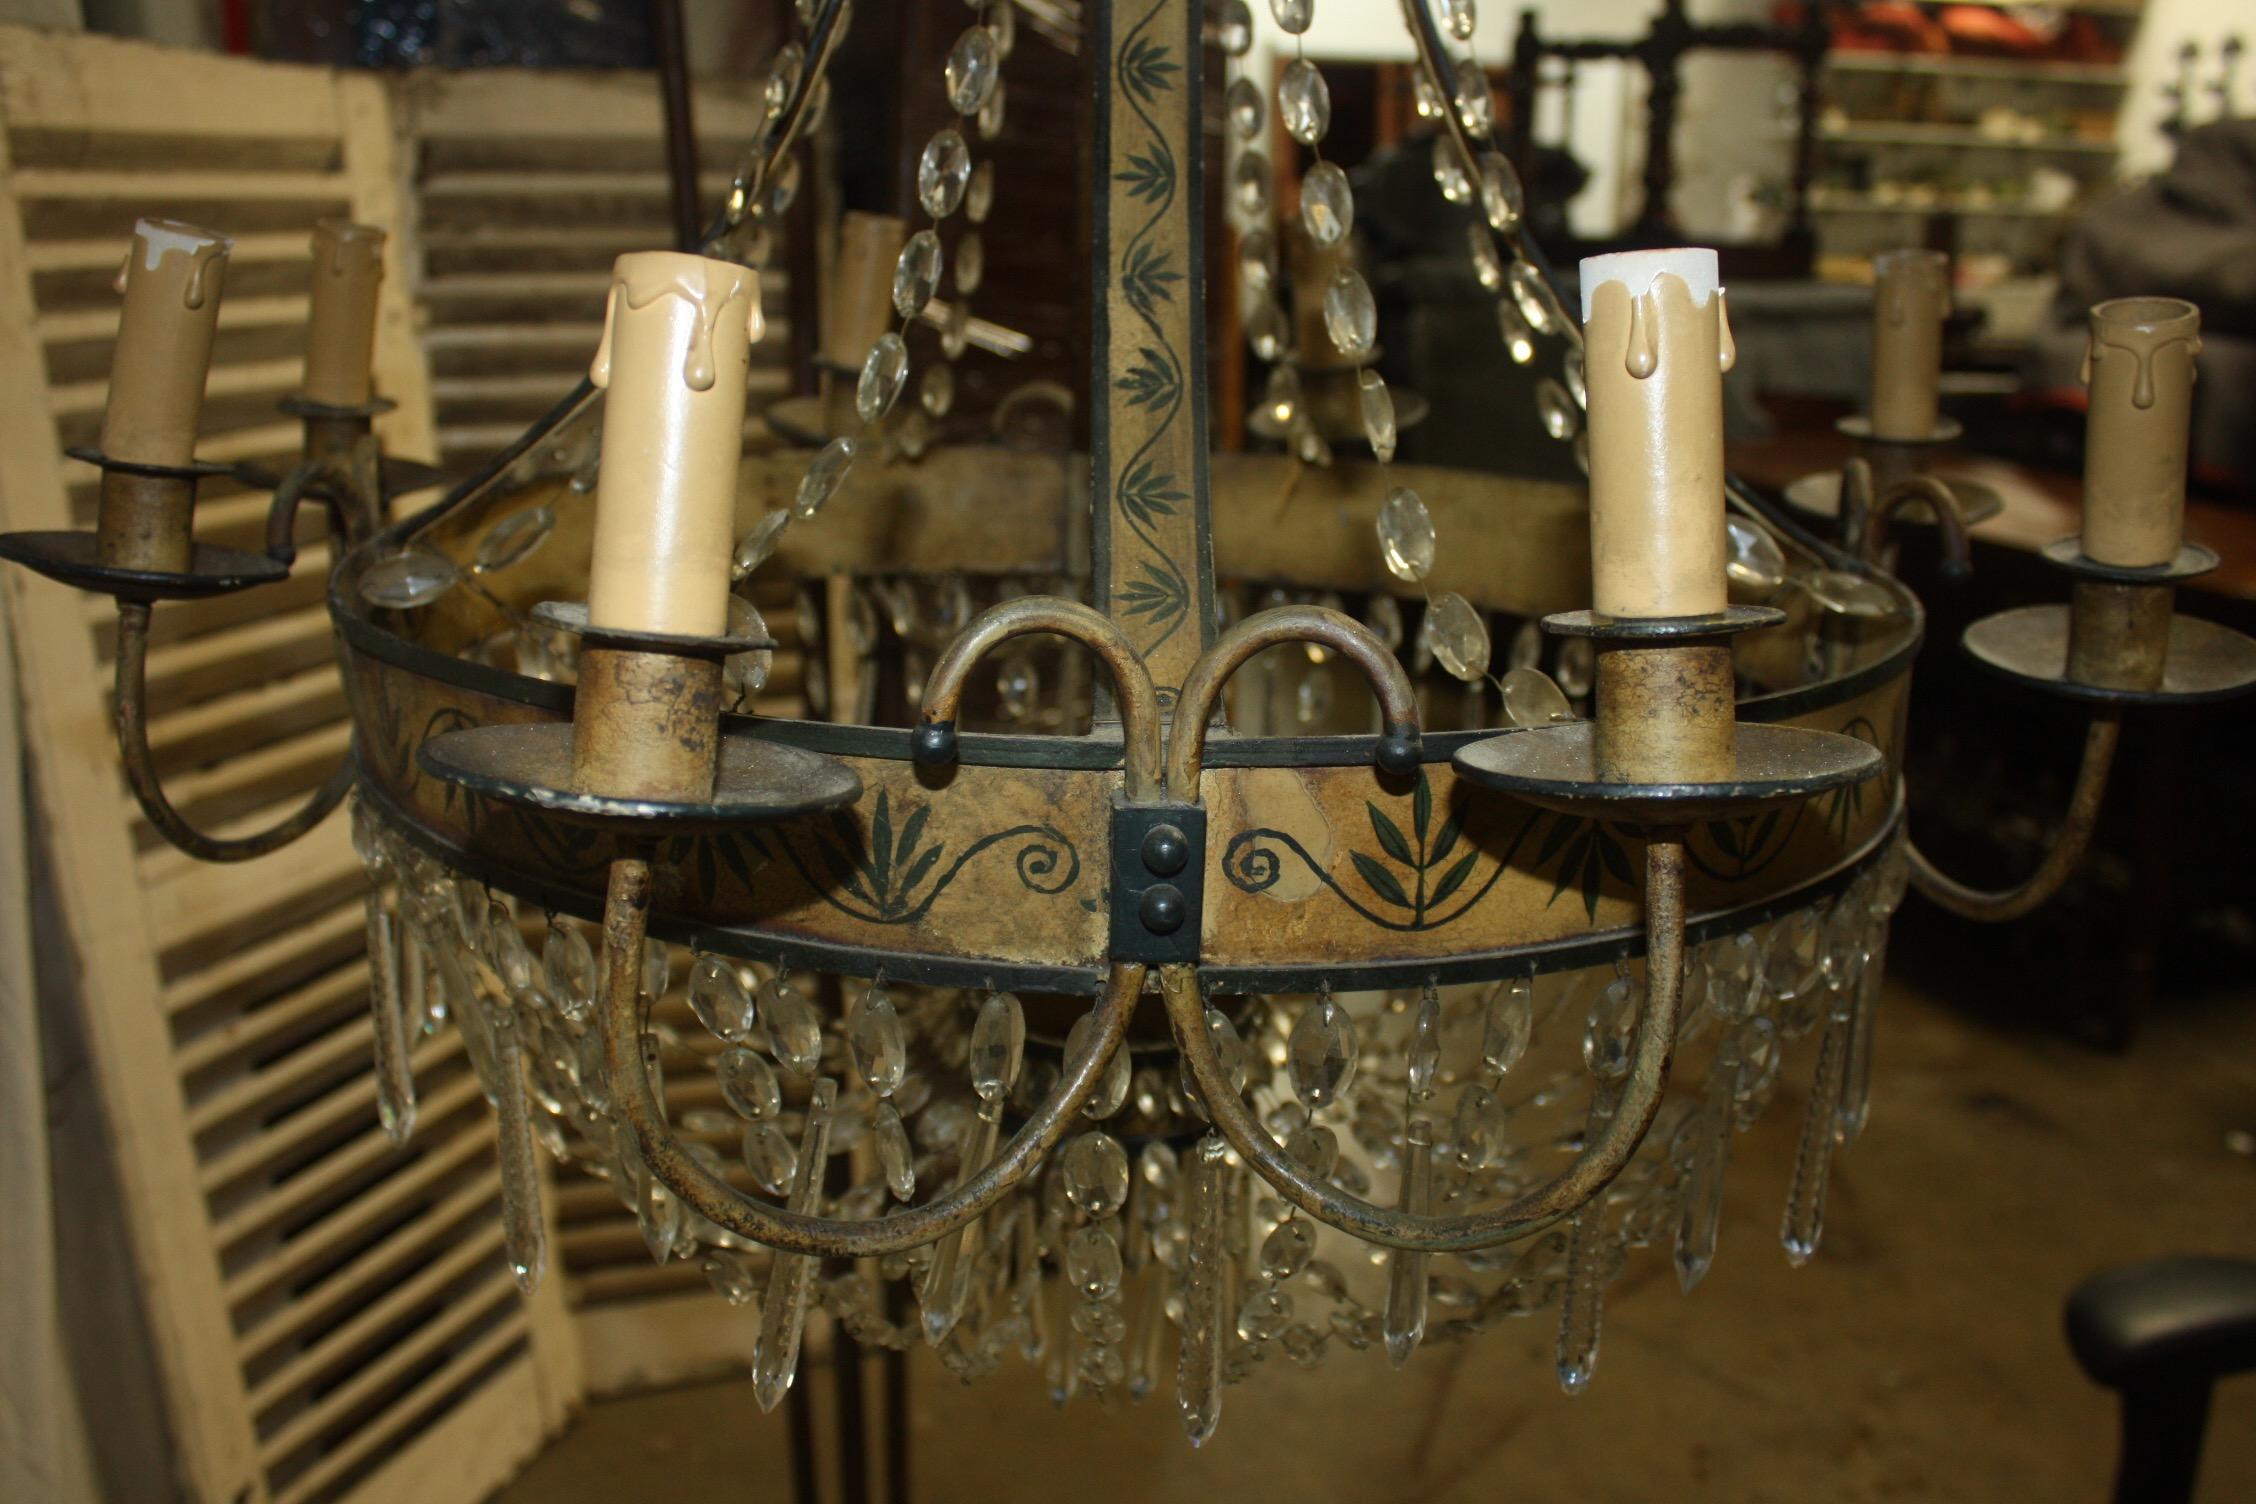 Sublime 19th Century French Empire Chandelier In Excellent Condition For Sale In Stockbridge, GA